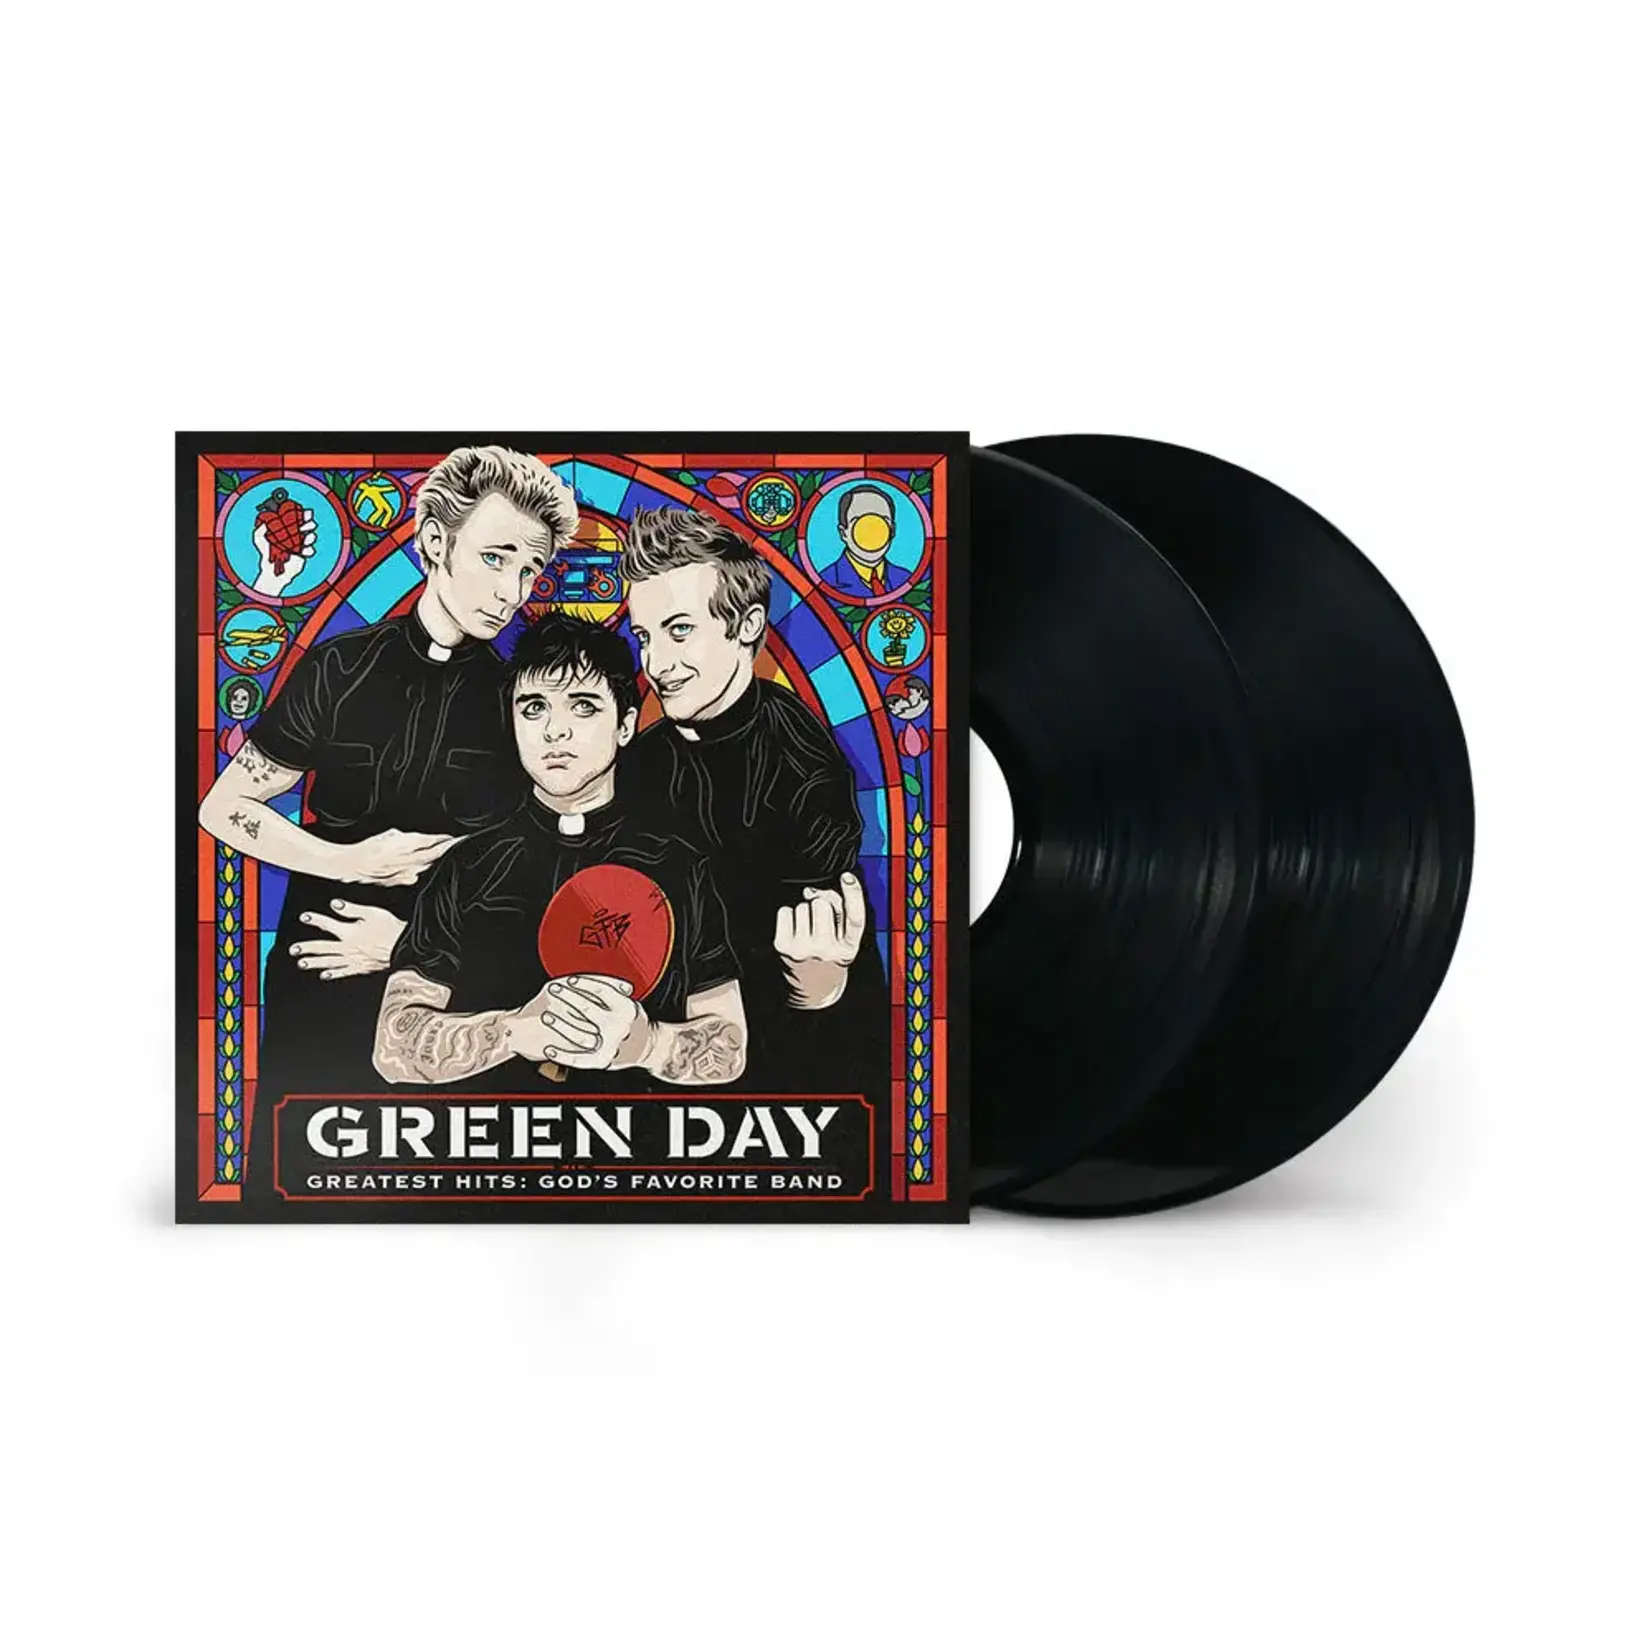 Green Day - Greatest Hits: God's Favorite Band [2LP]